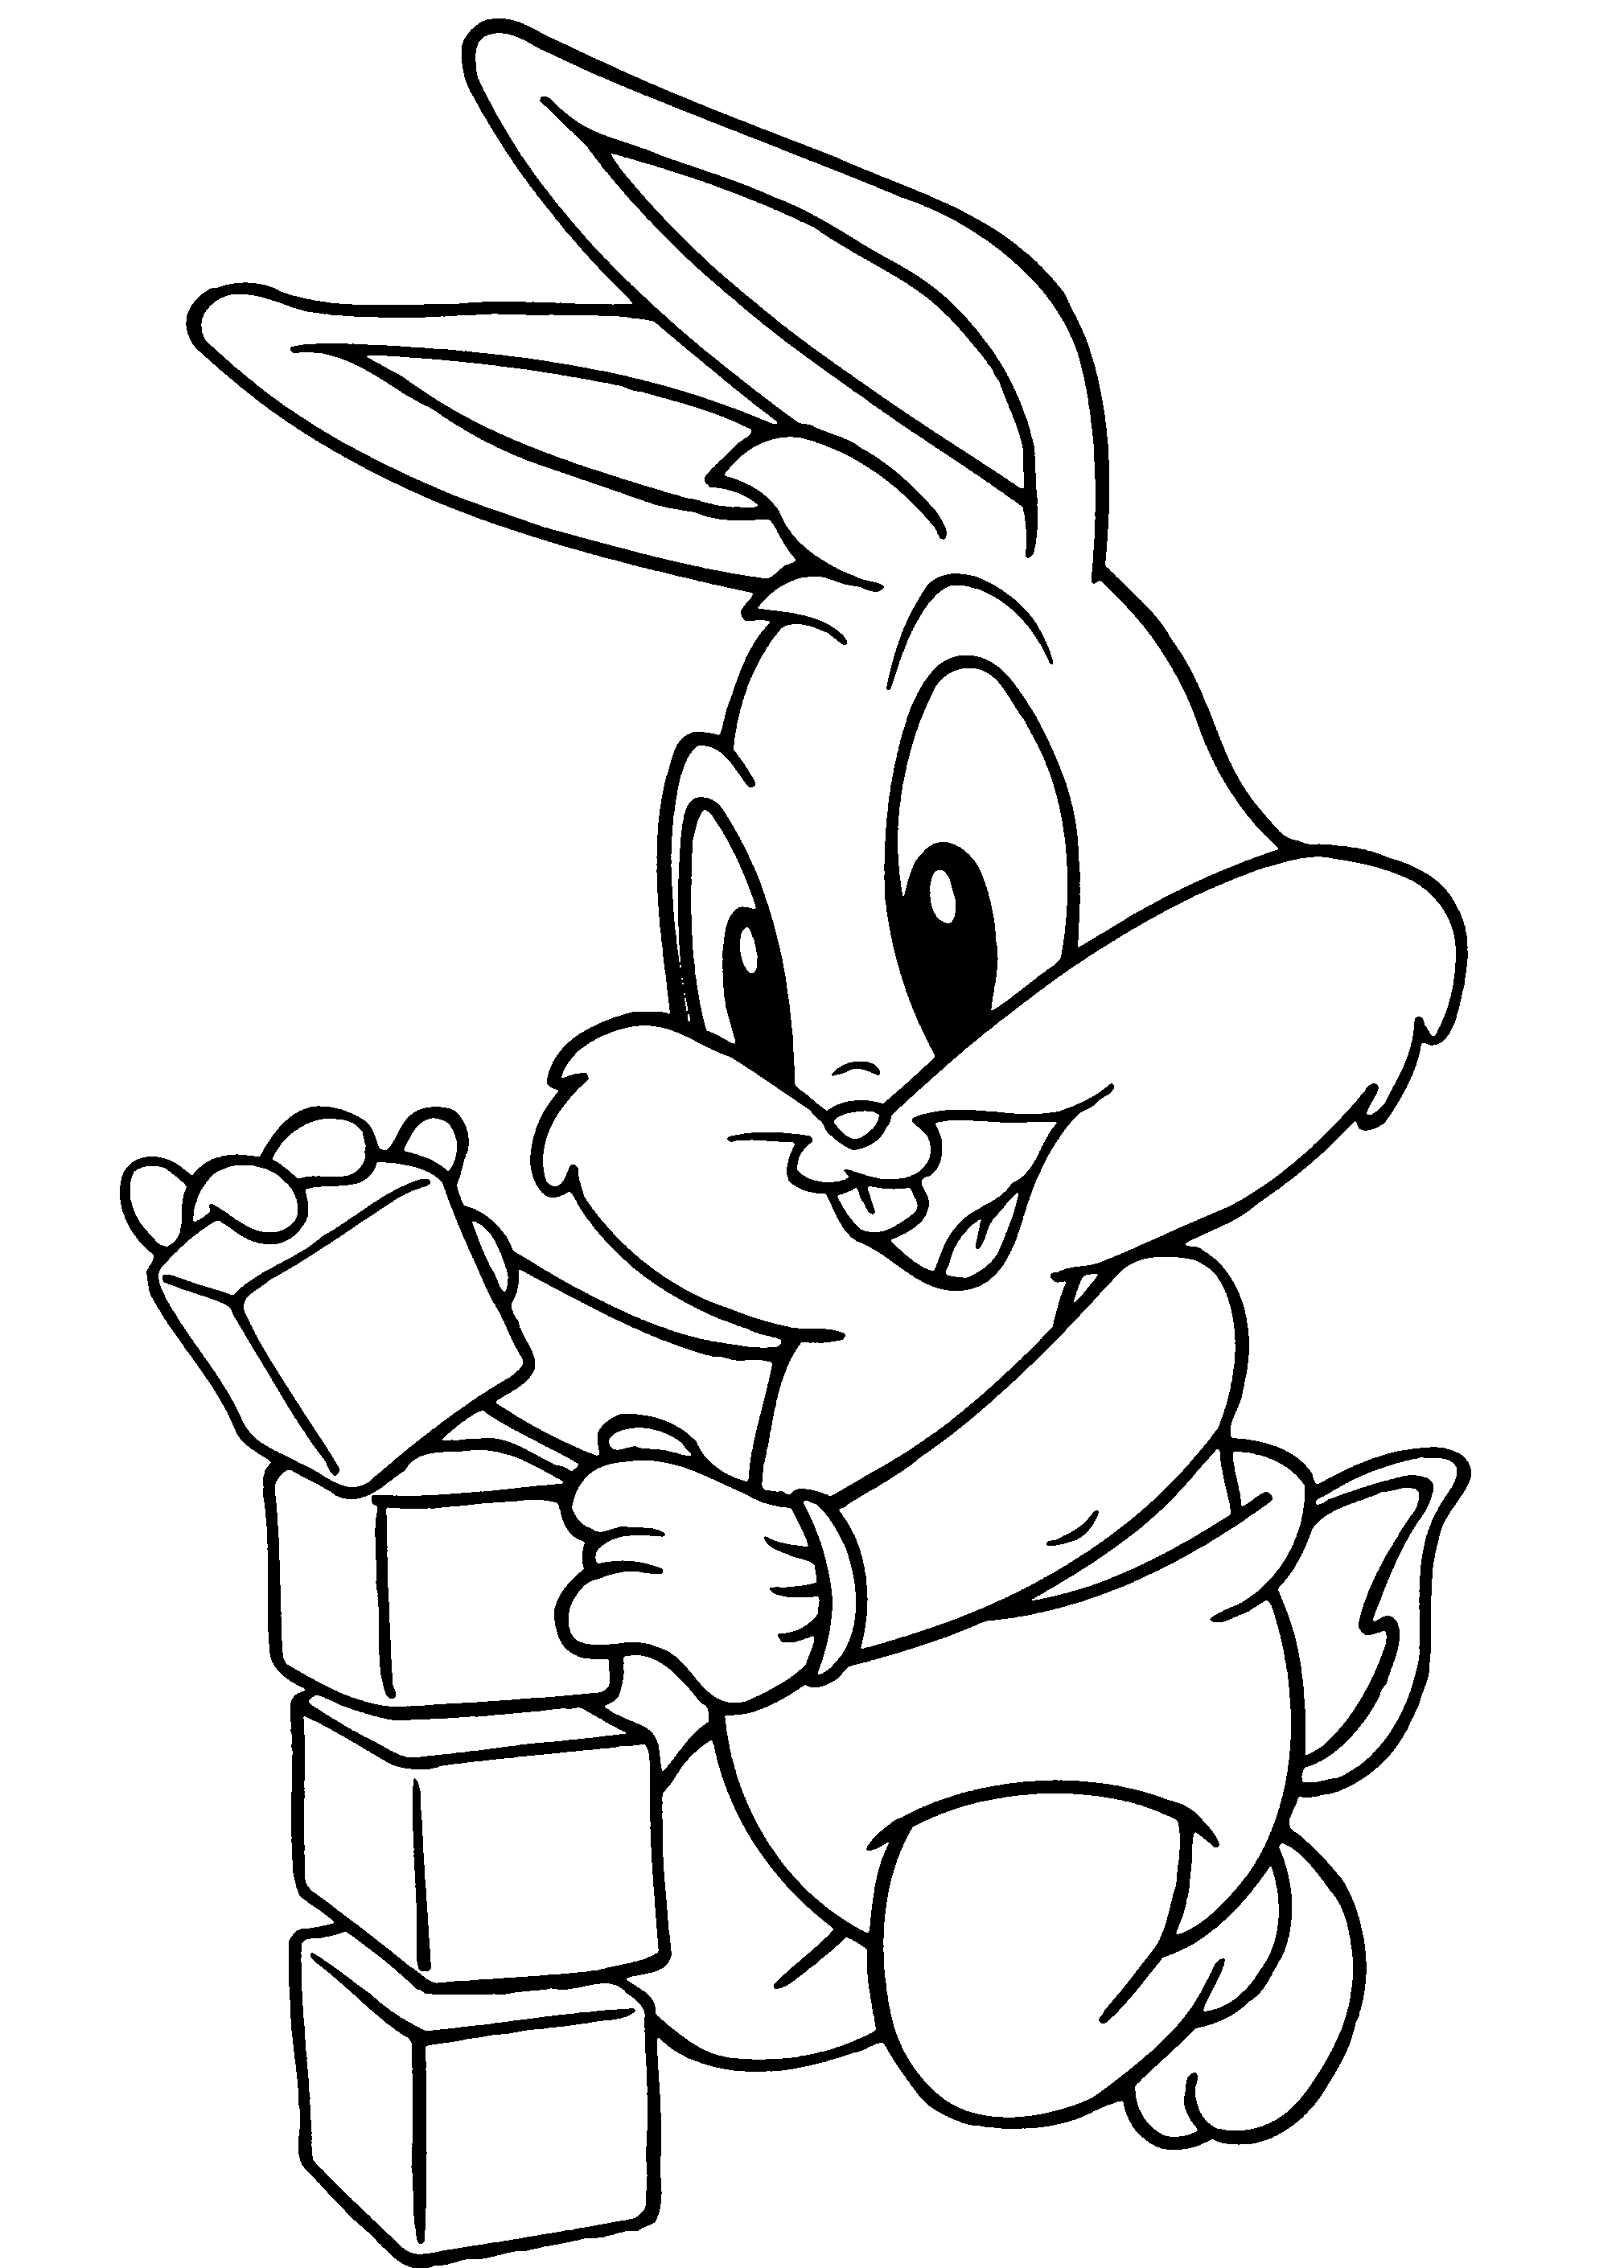 Baby Looney Tunes Coloring Page